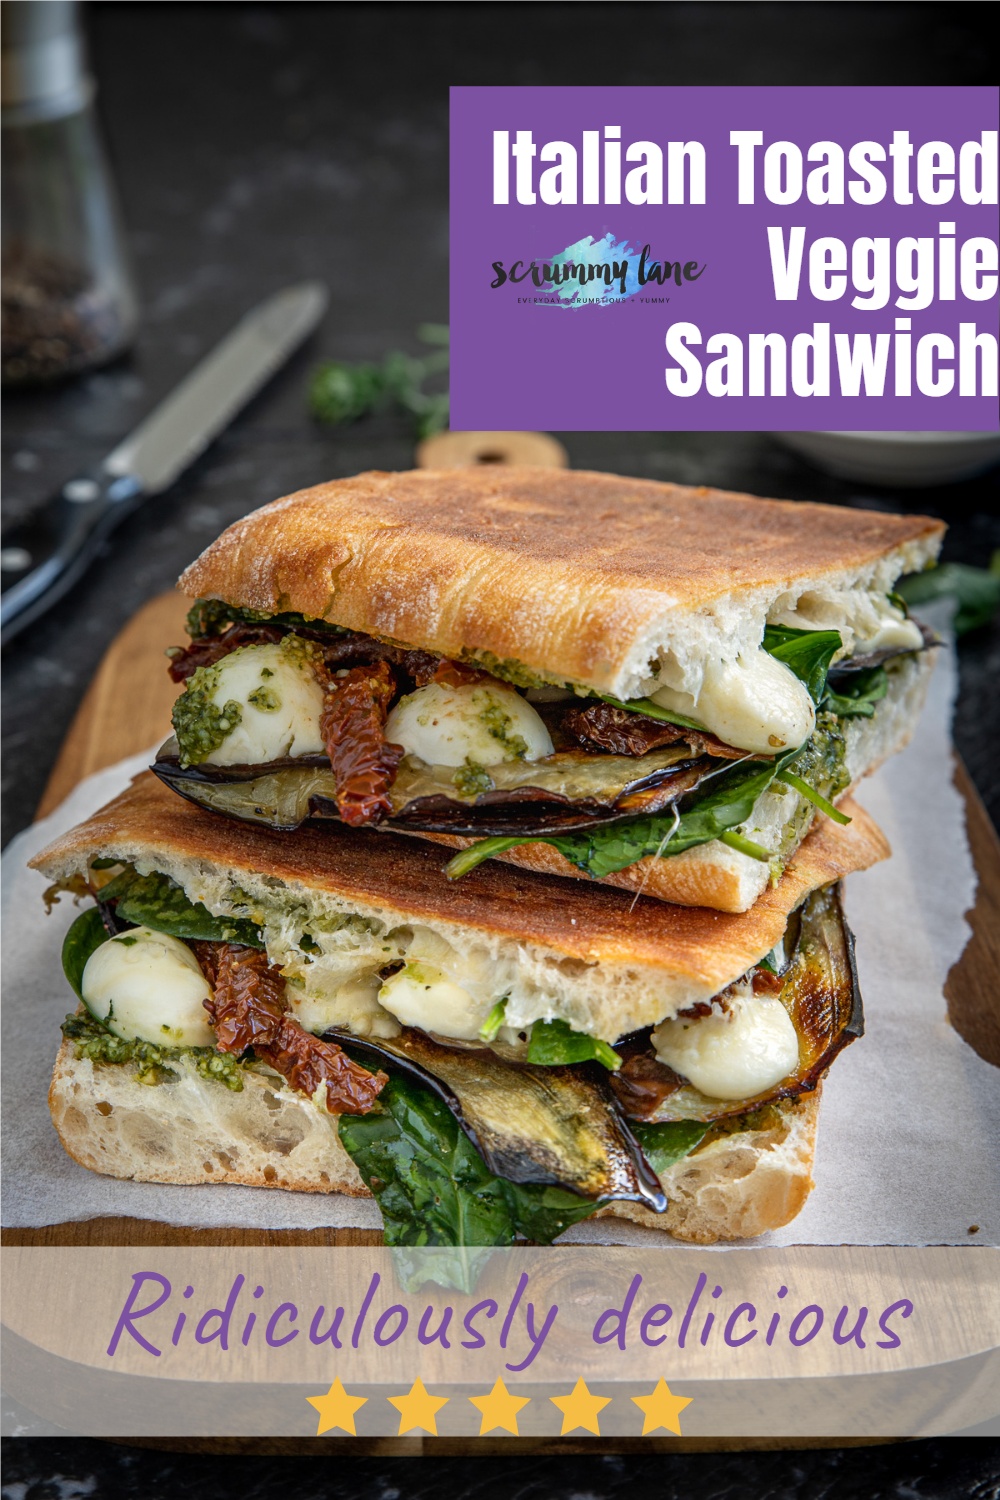 Two halves of an Italian toasted veggie sandwich on a wooden board for Pinterest with a title on it